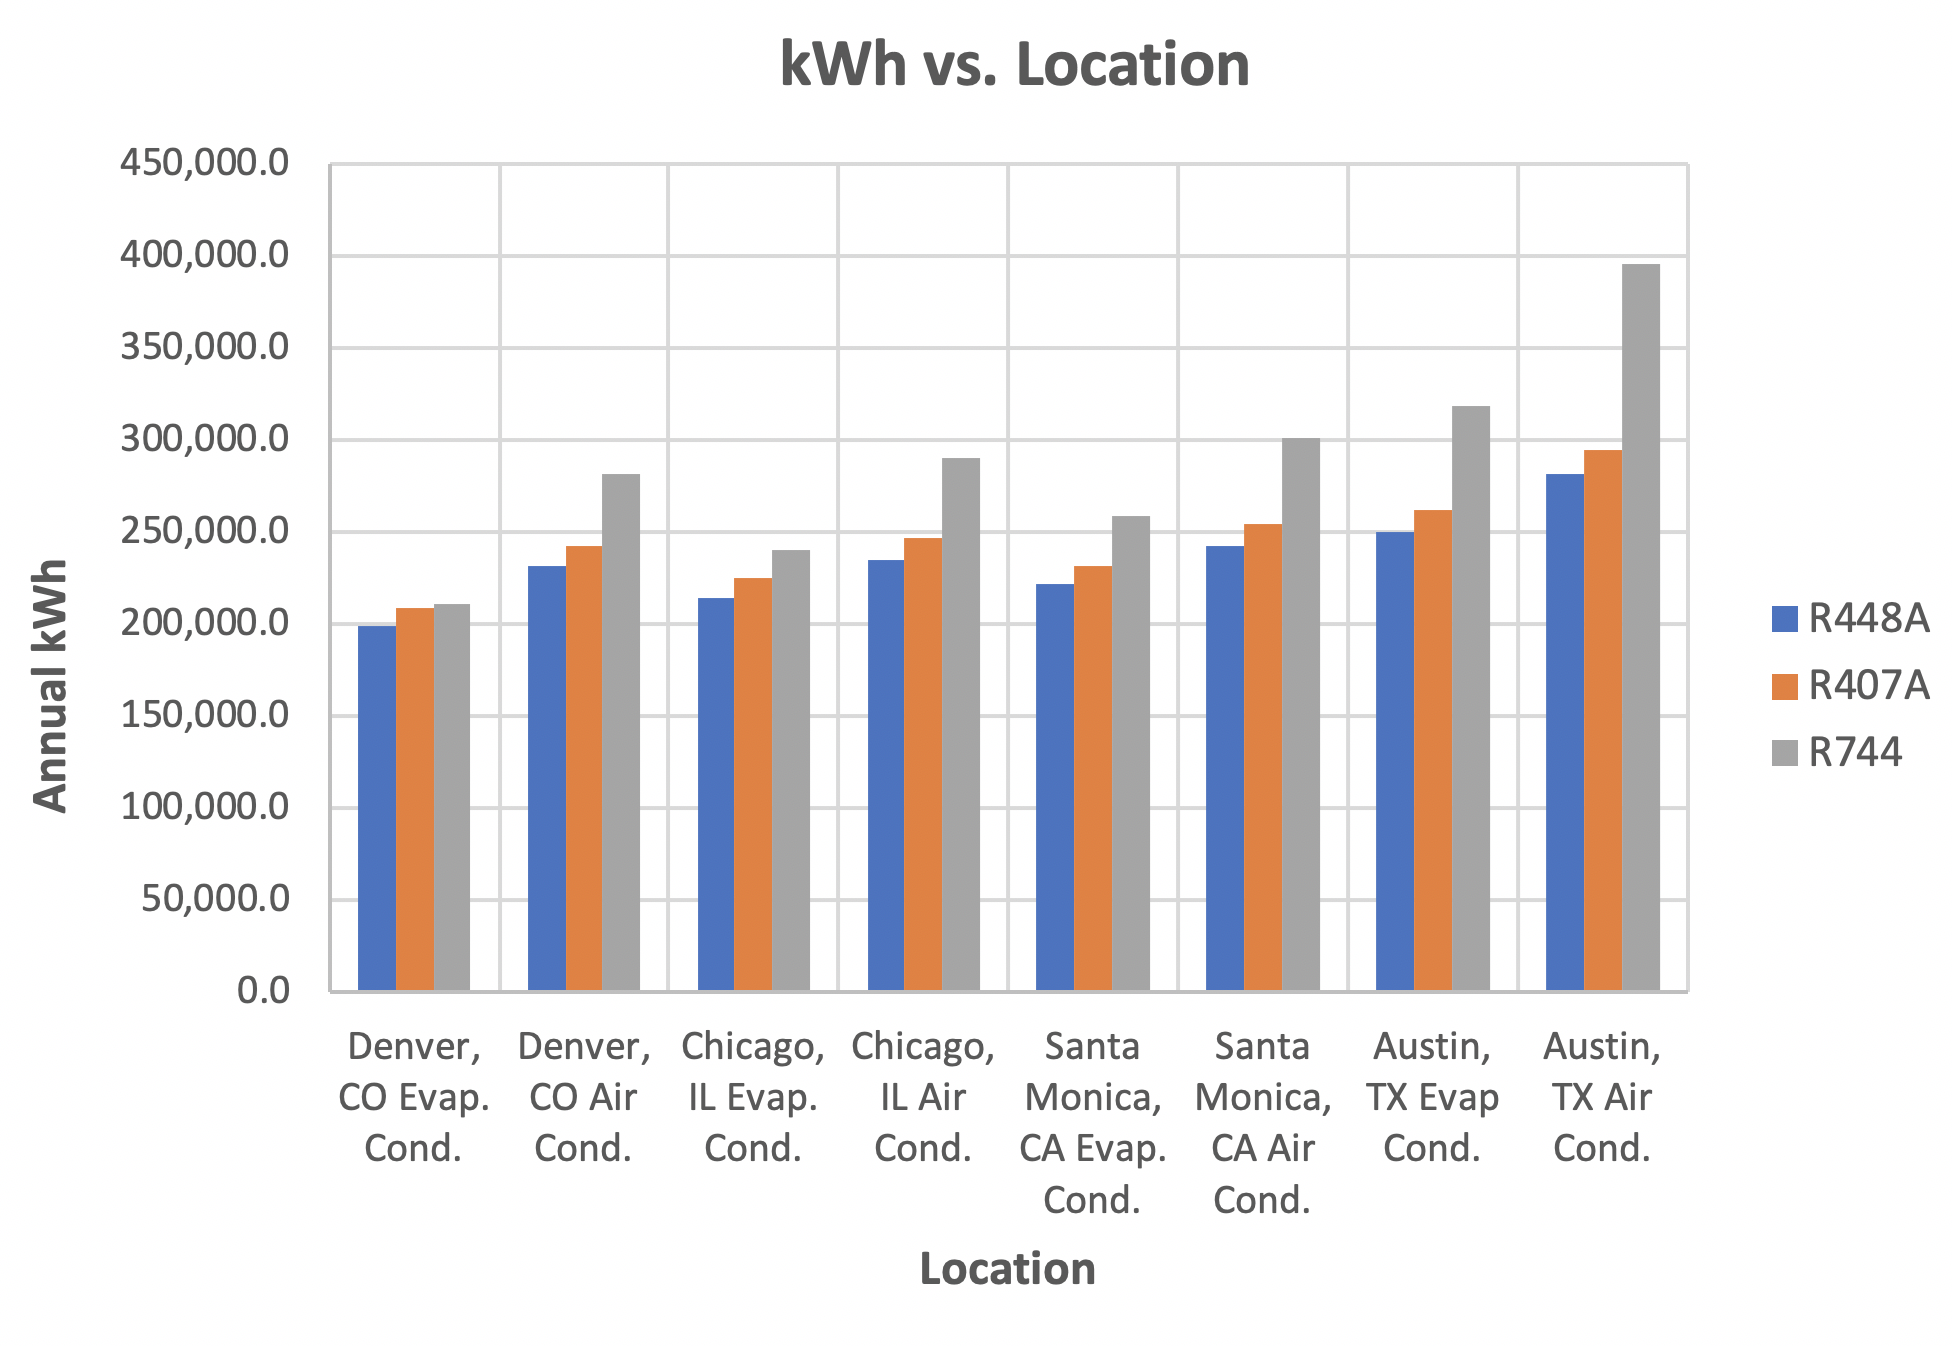 kWh vs location for various refrigerants